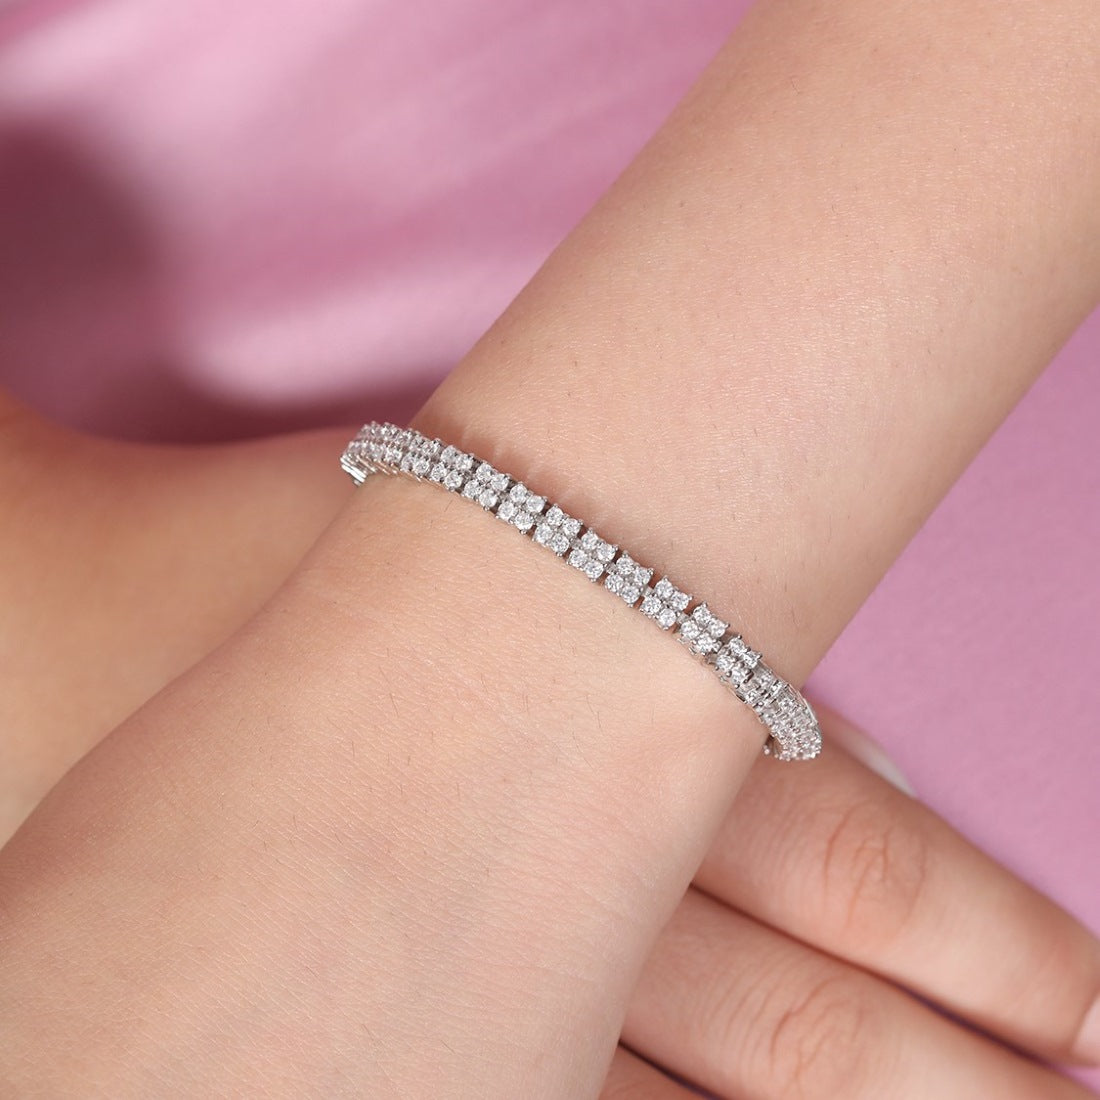 Square Brilliance Rhodium Plated 925 Sterling Silver Bracelet